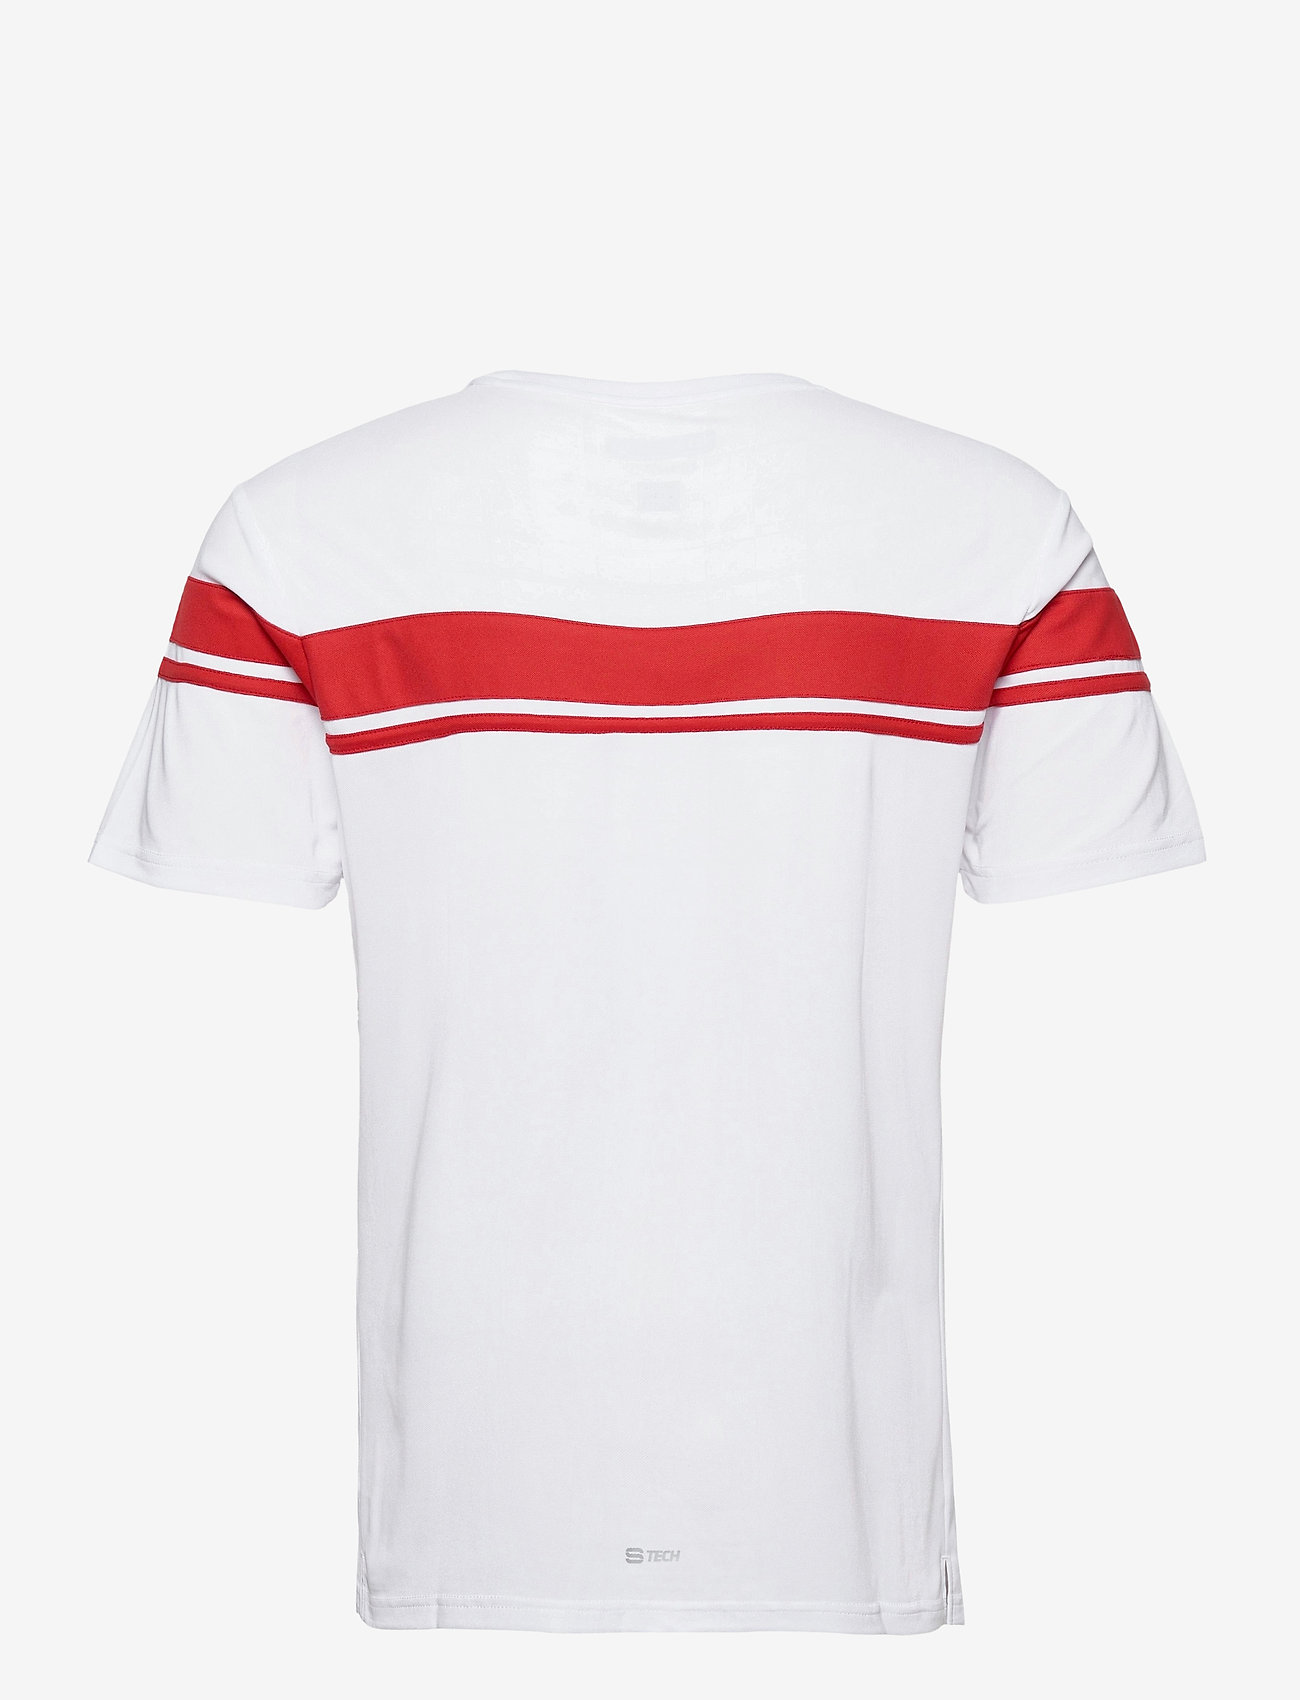 Sergio Tacchini - YOUNG LINE PRO T-SHIRT - t-shirts - white/red - 1